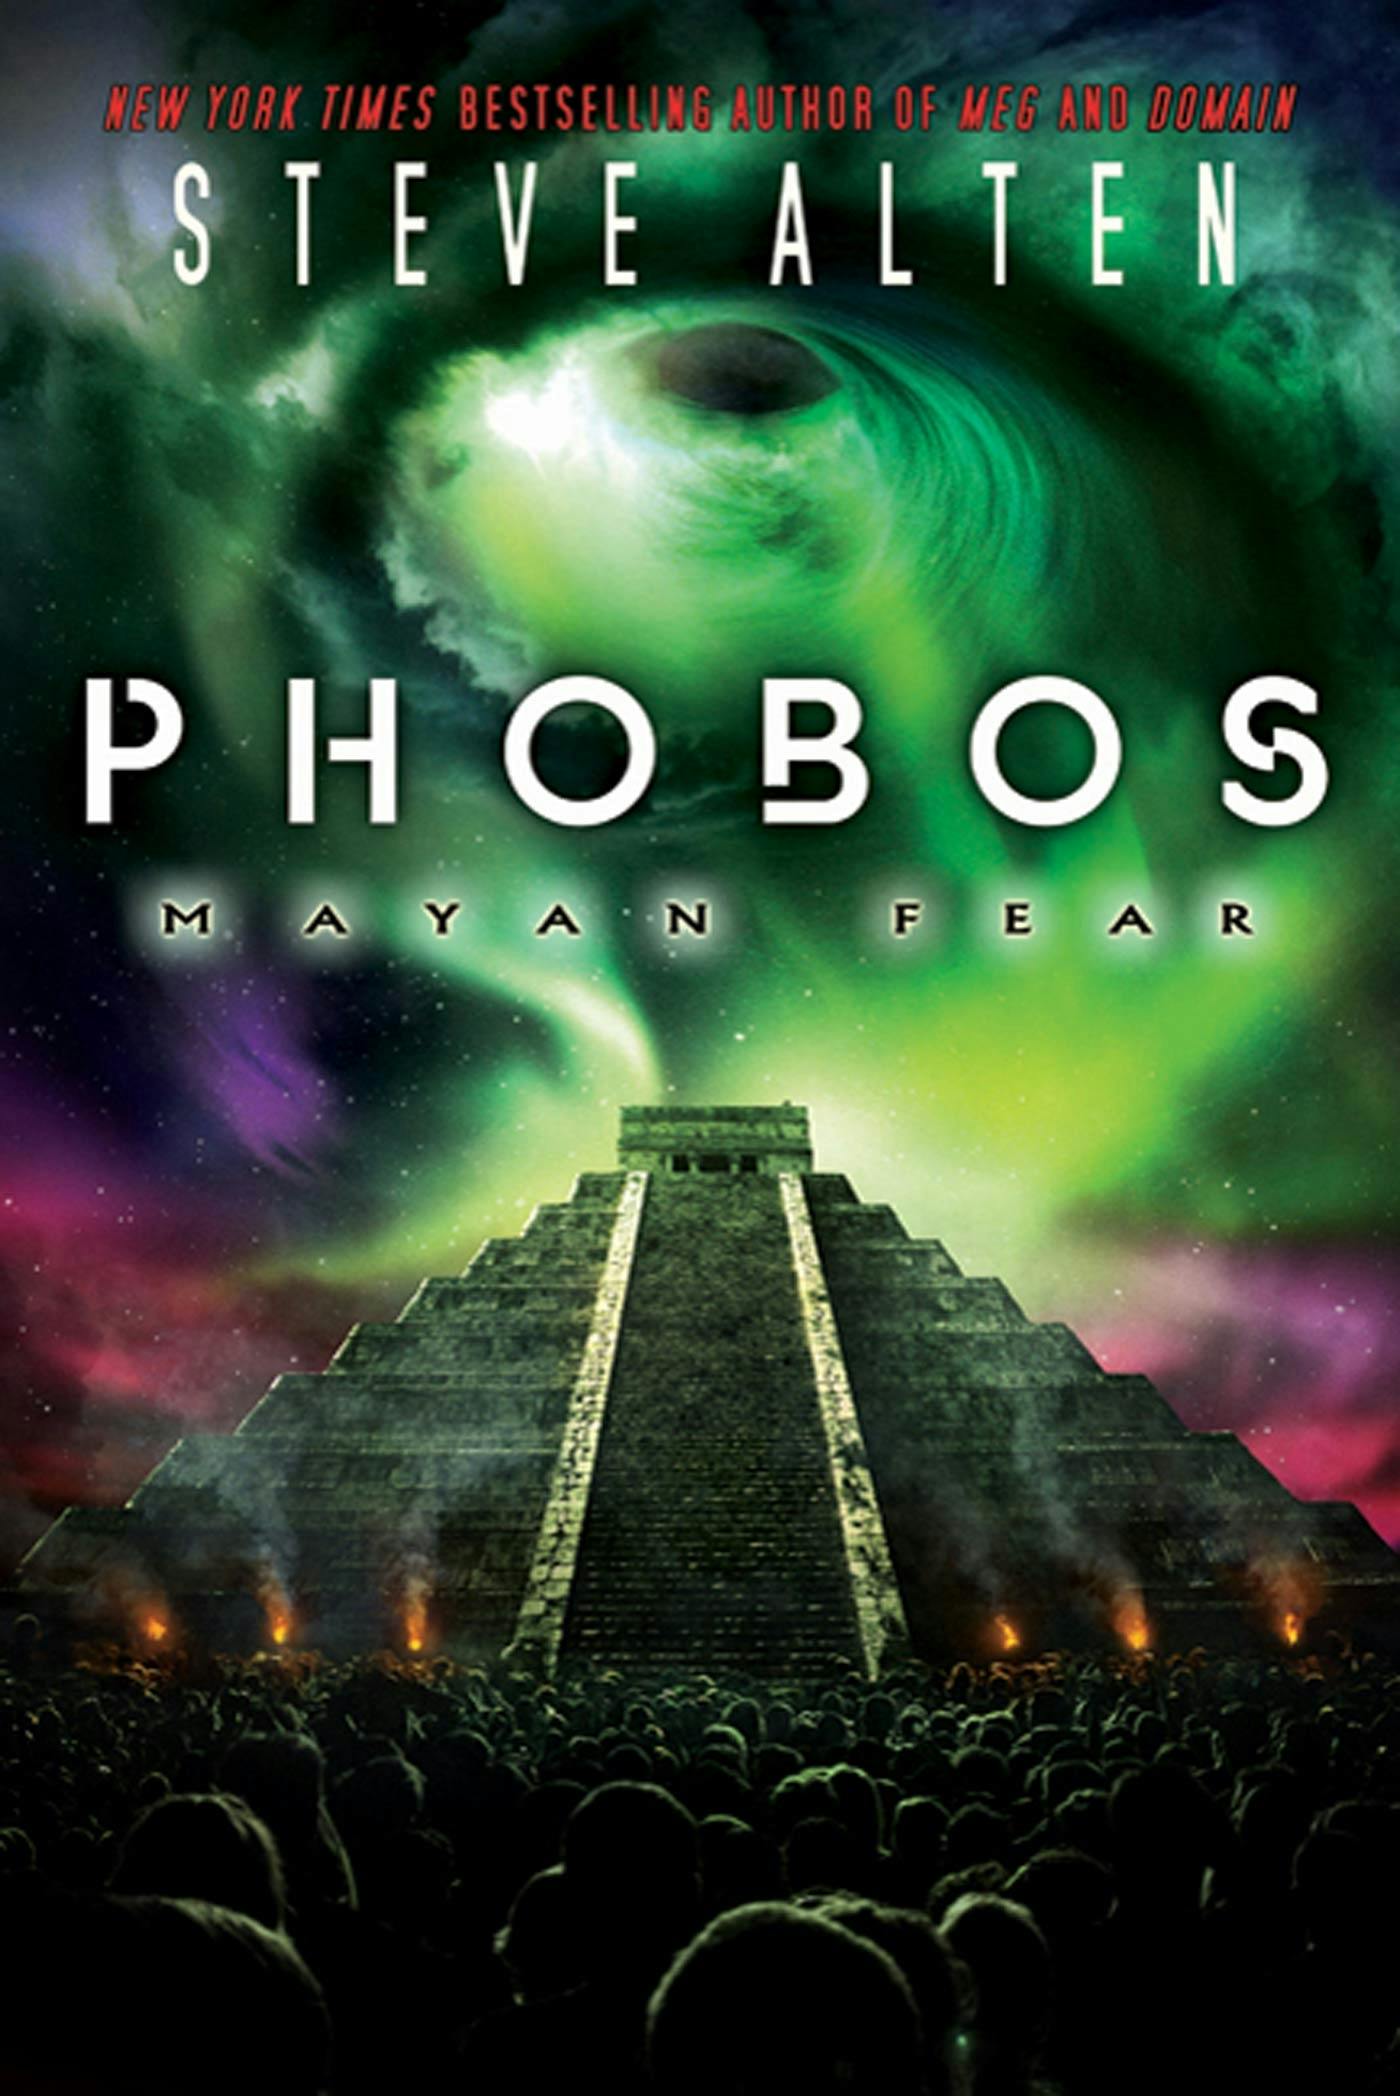 Cover for the book titled as: Phobos